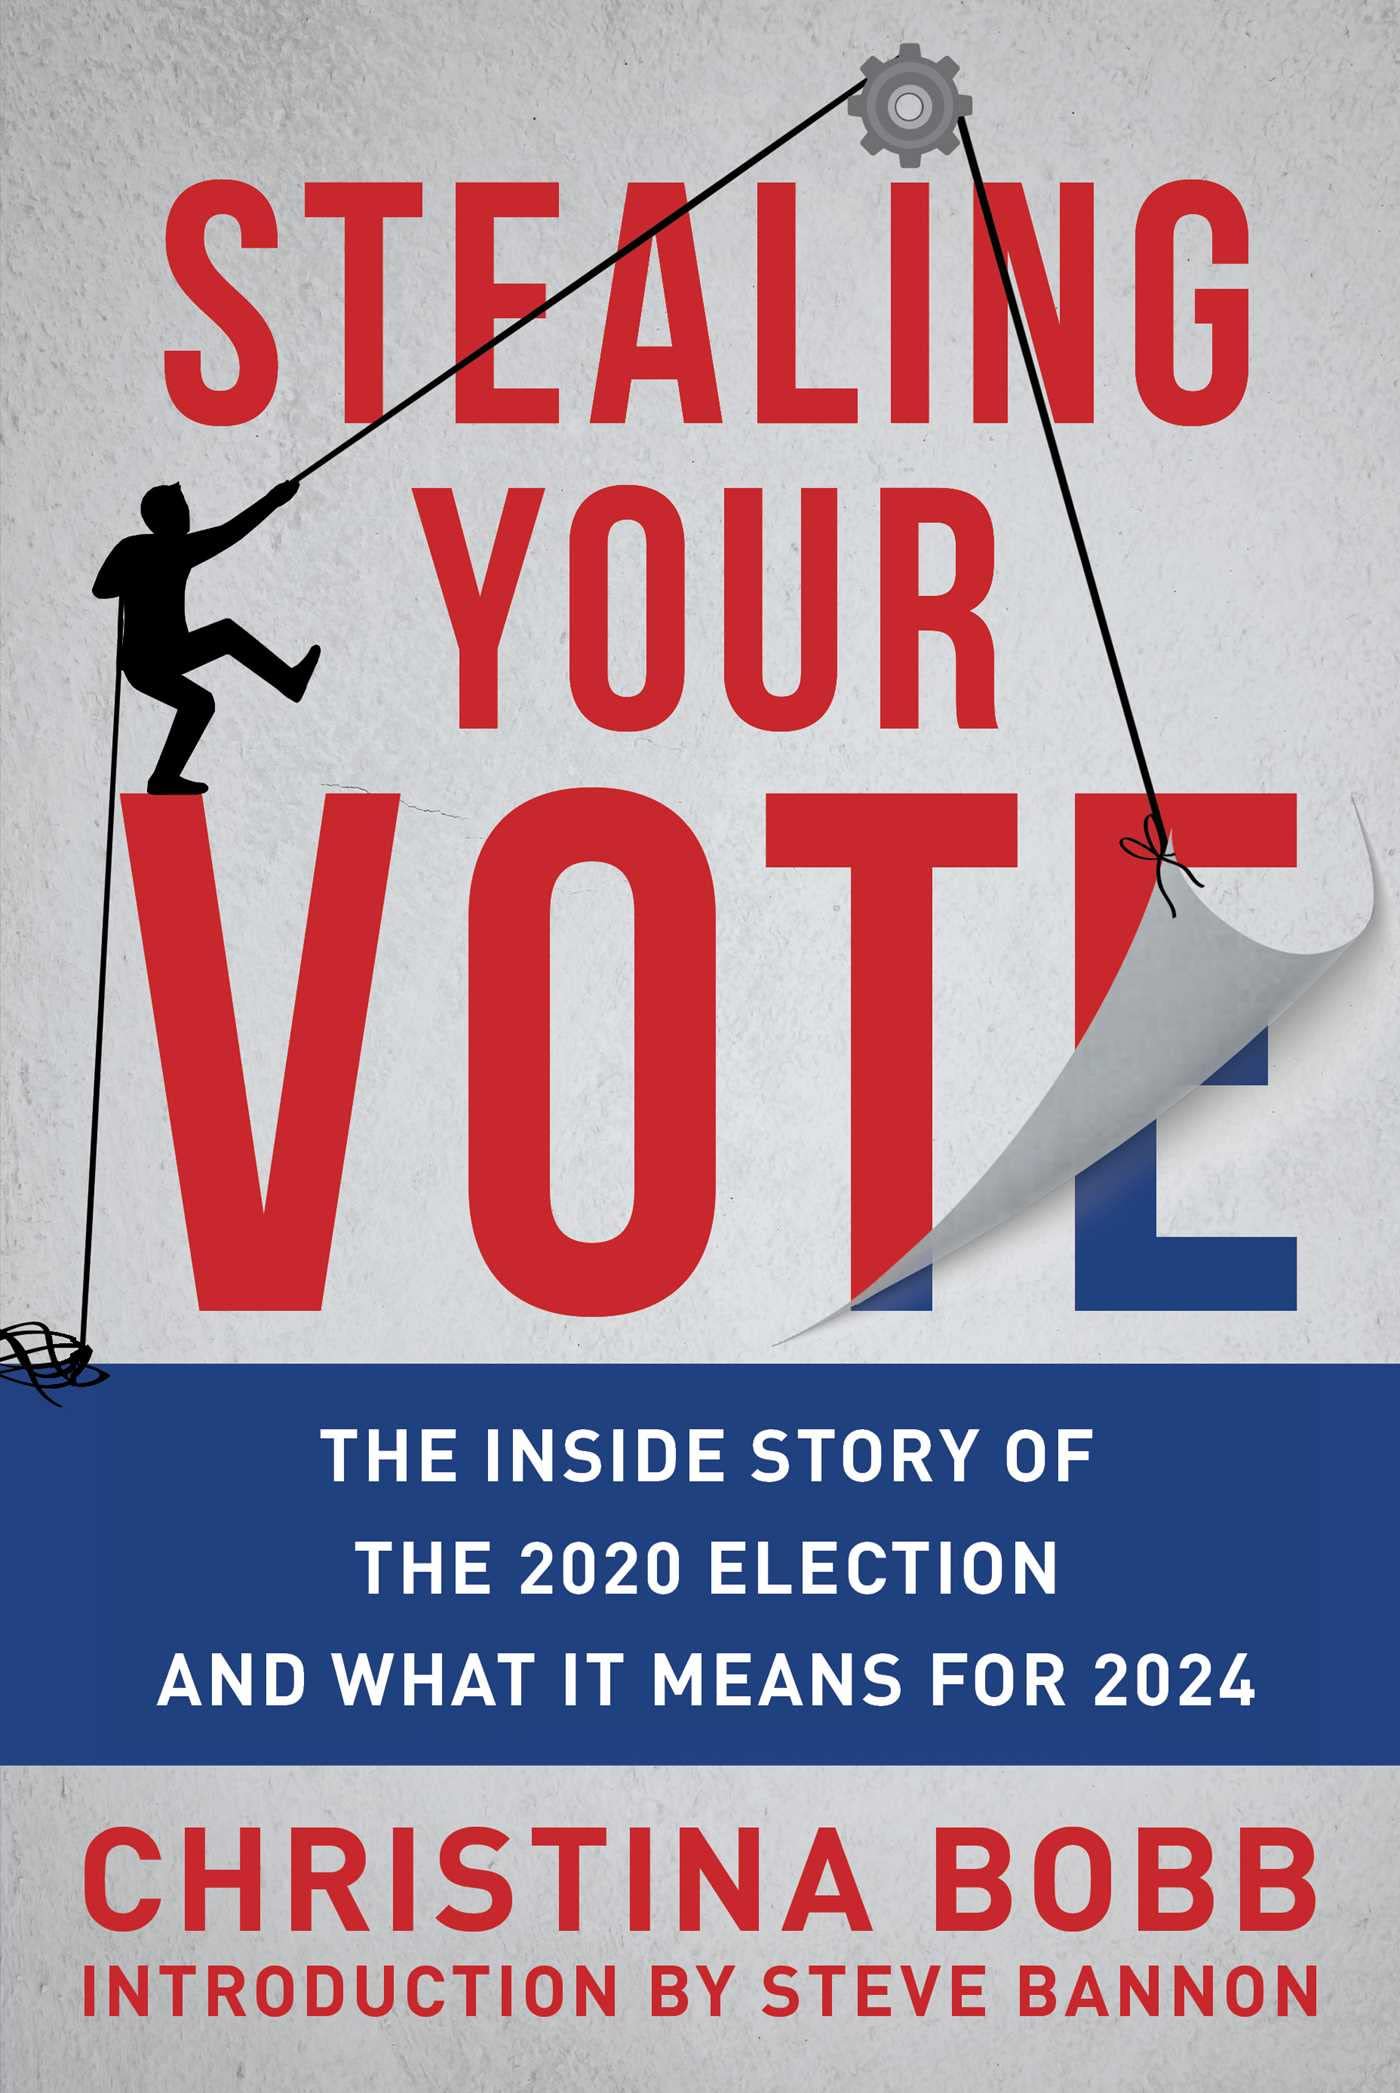 BOOK REVIEW: Stealing Your Vote By Christina Bobb